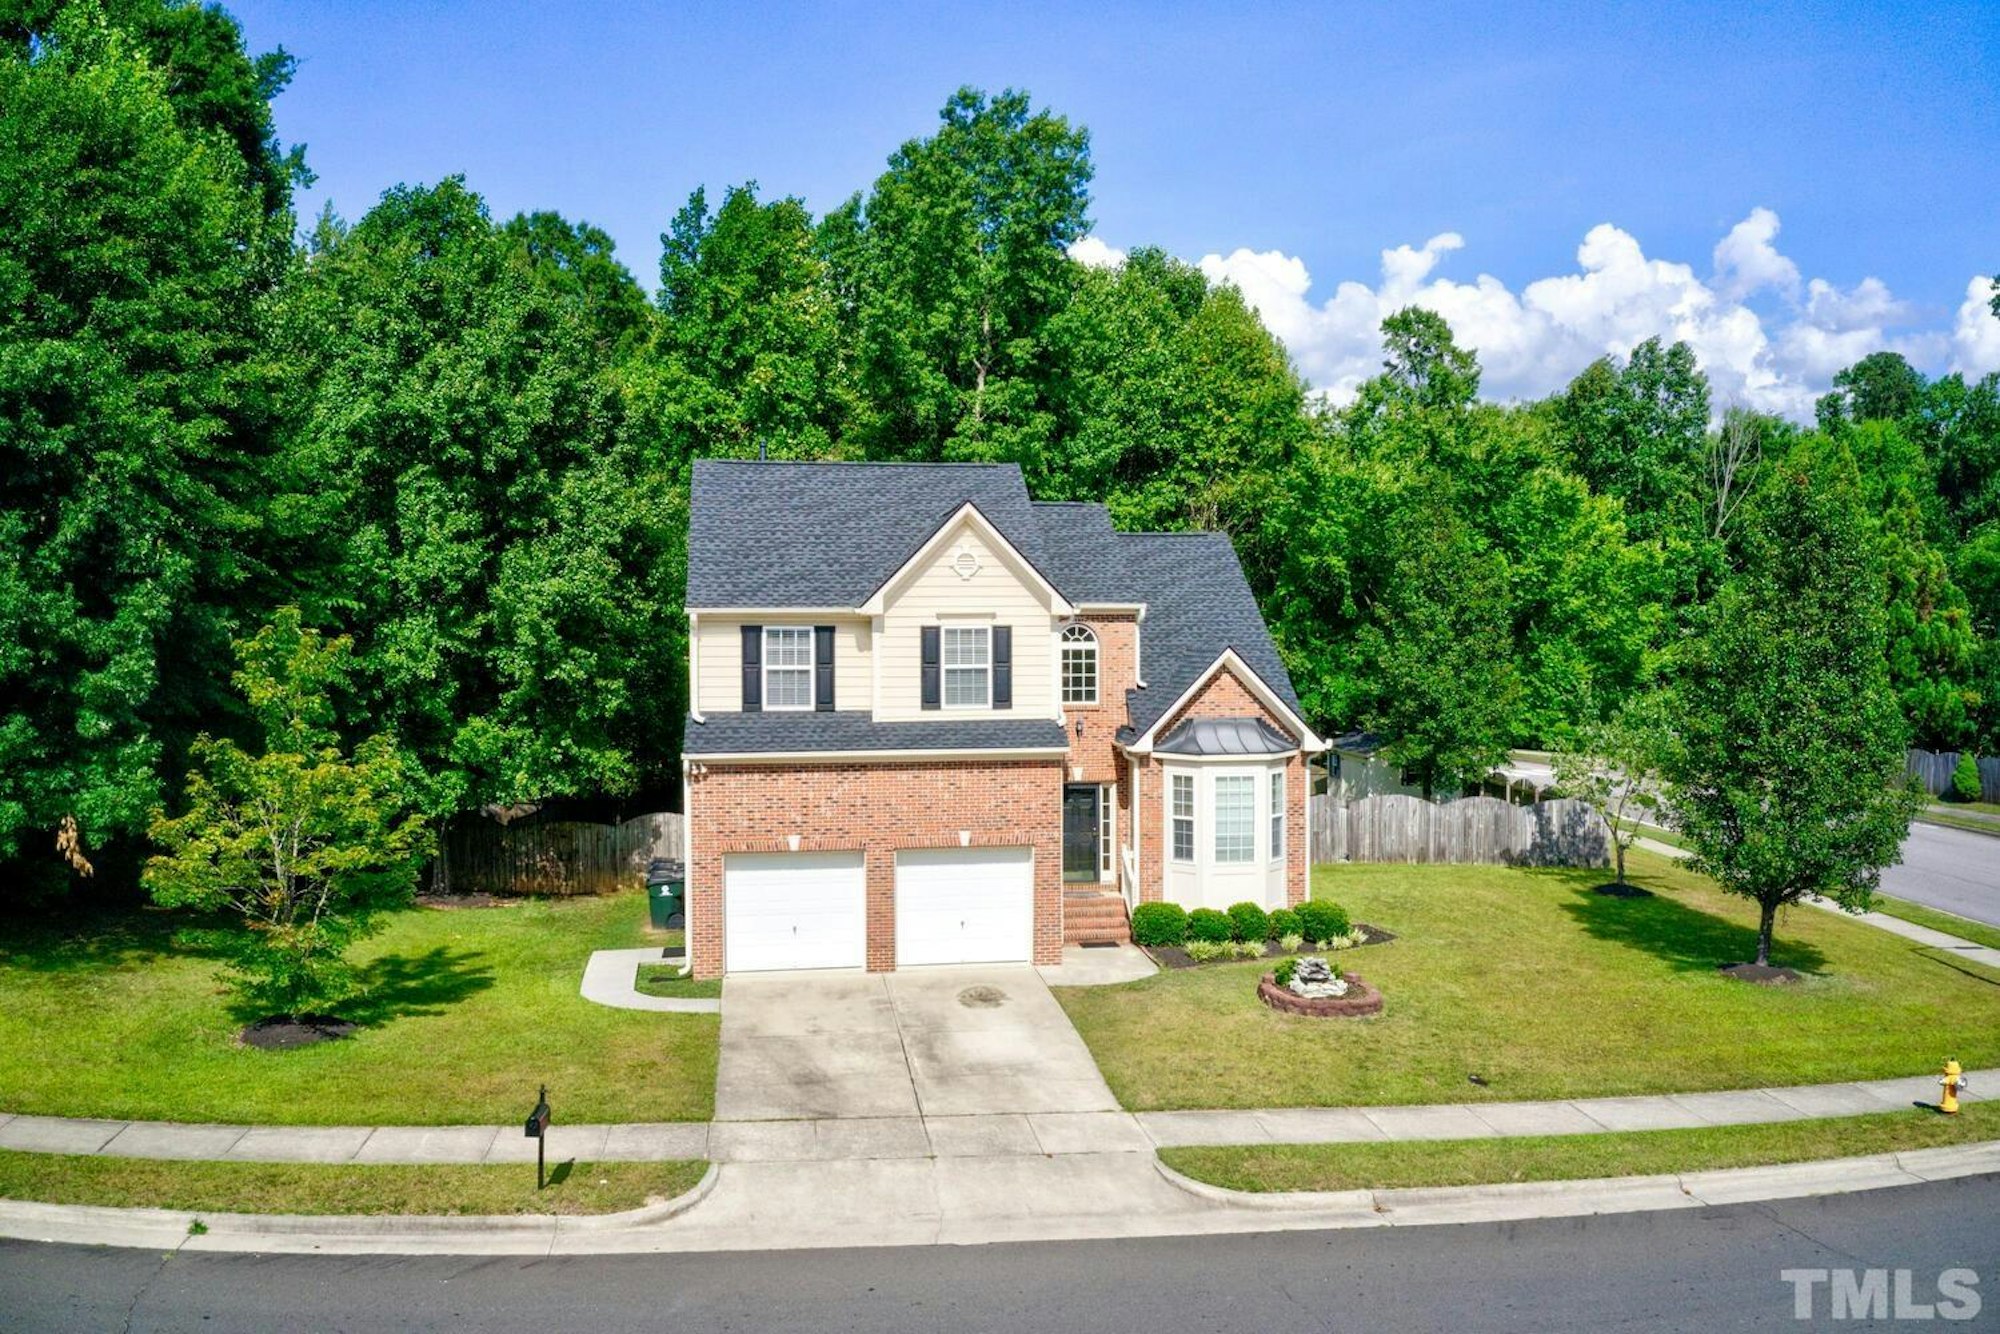 Photo 1 of 51 - 902 Widewaters Pkwy, Knightdale, NC 27545